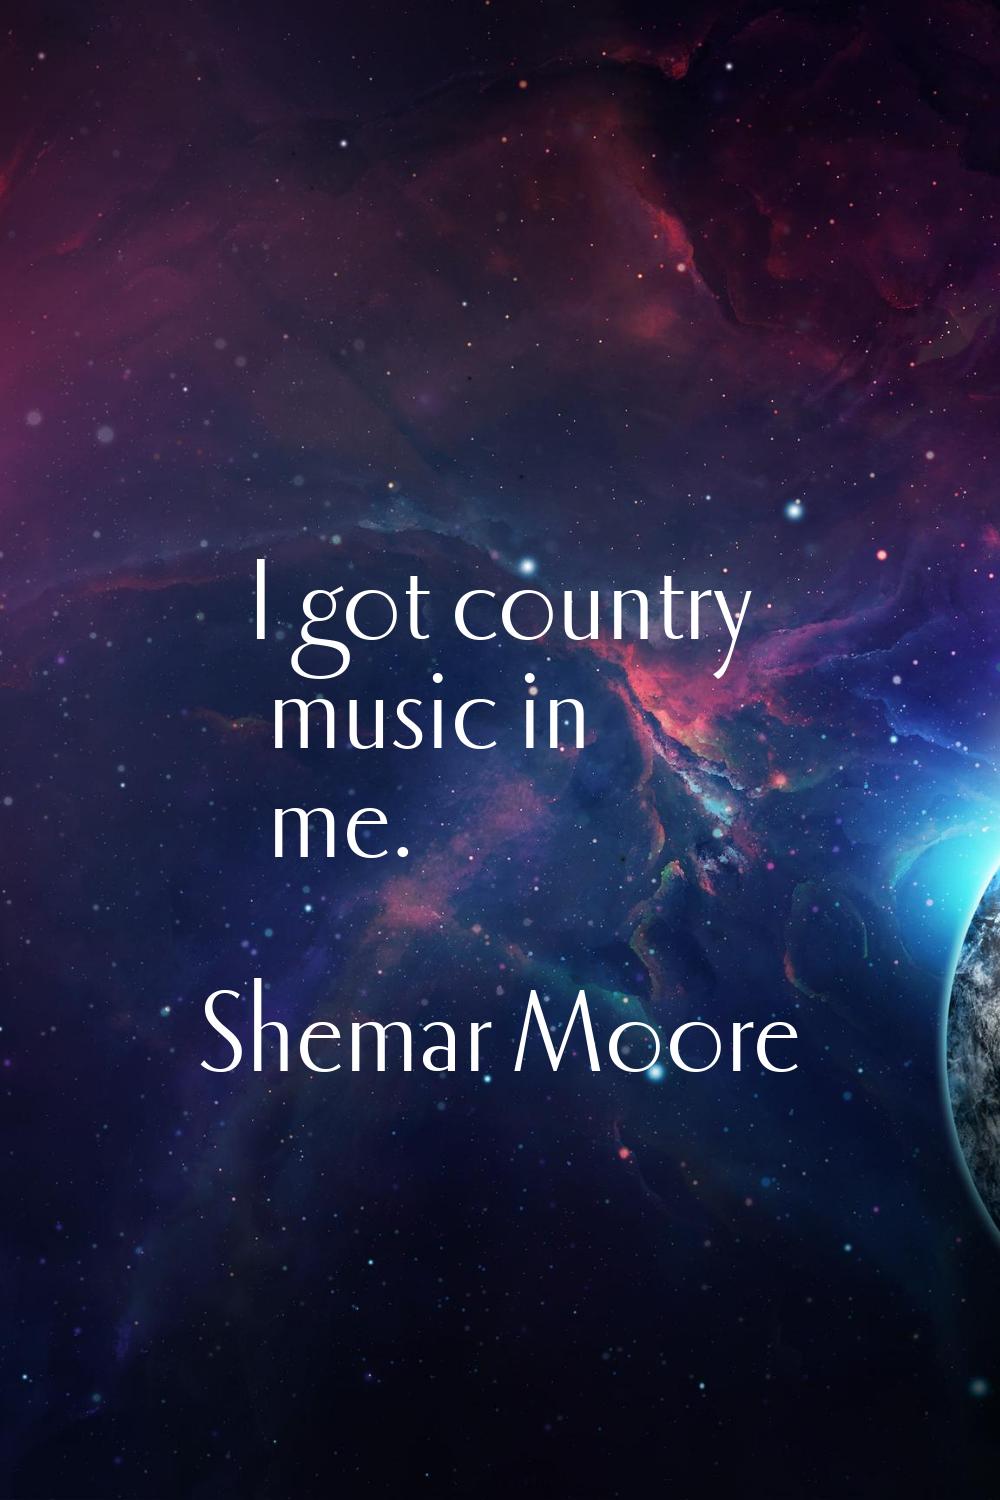 I got country music in me.